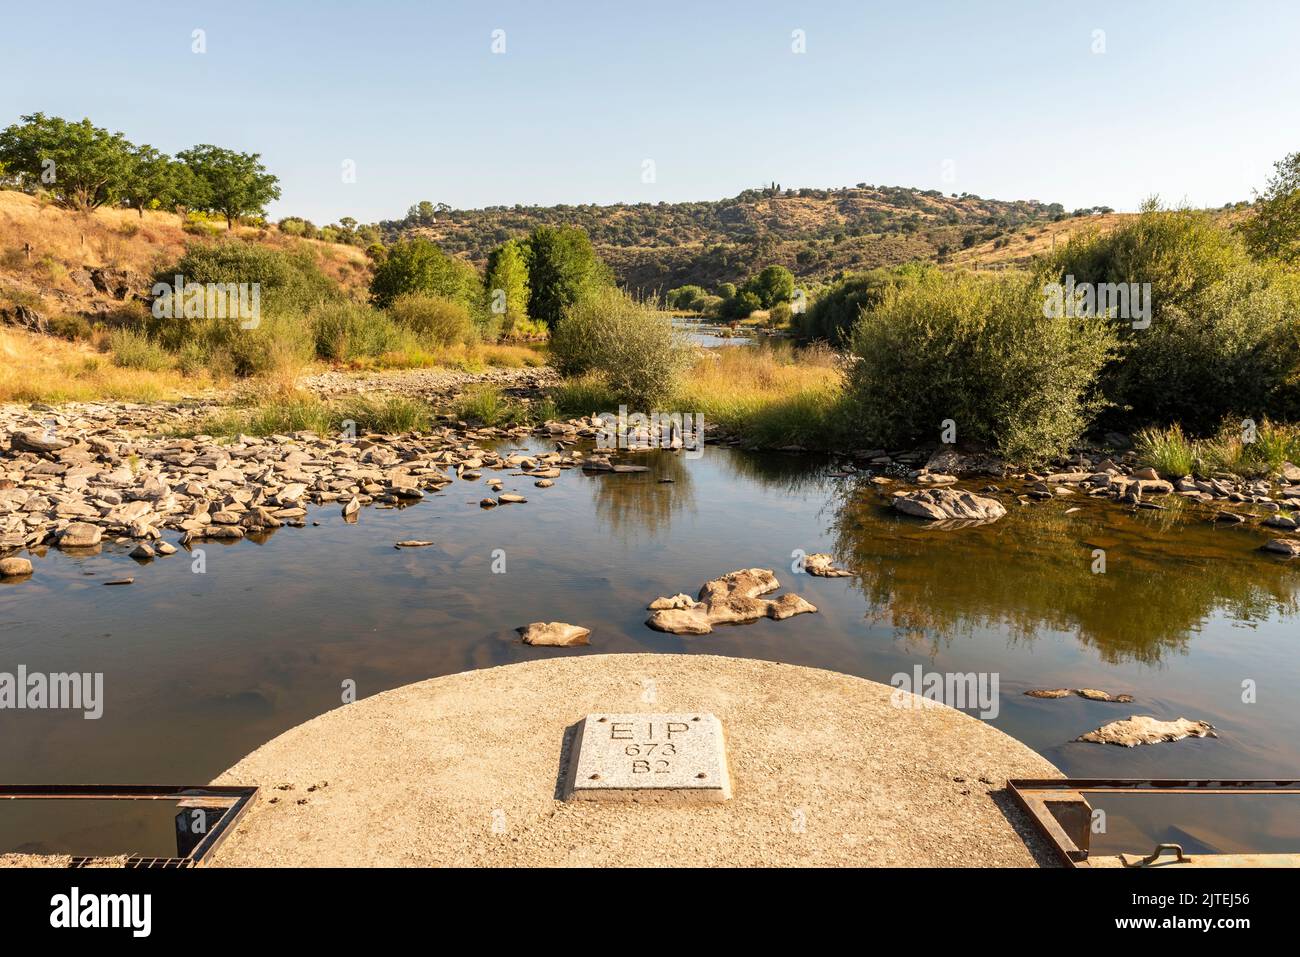 A plaque marks the border between Spain and Portugal on the remote rural bridge and crossing point at Vado del Río Erjas (Erges or Eljas) Stock Photo